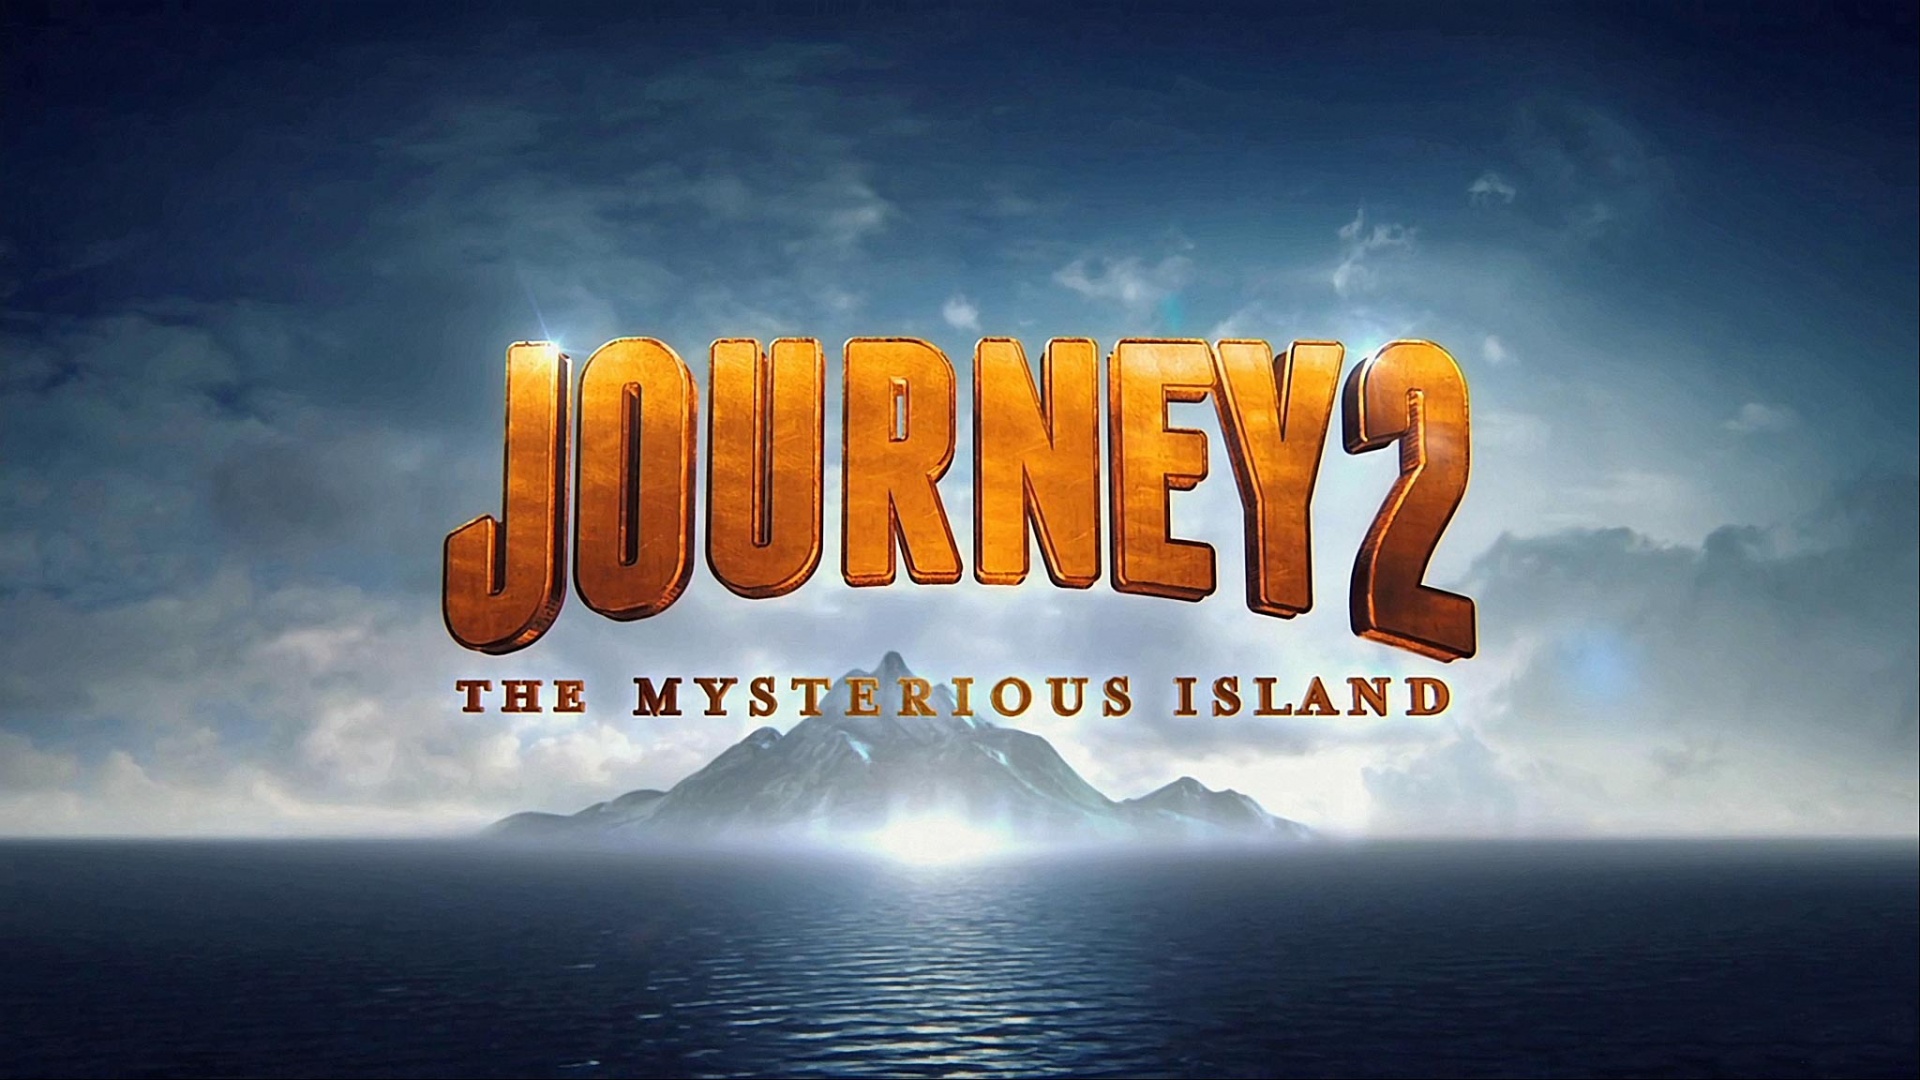 Movie Journey 2: The Mysterious Island HD Wallpaper | Background Image